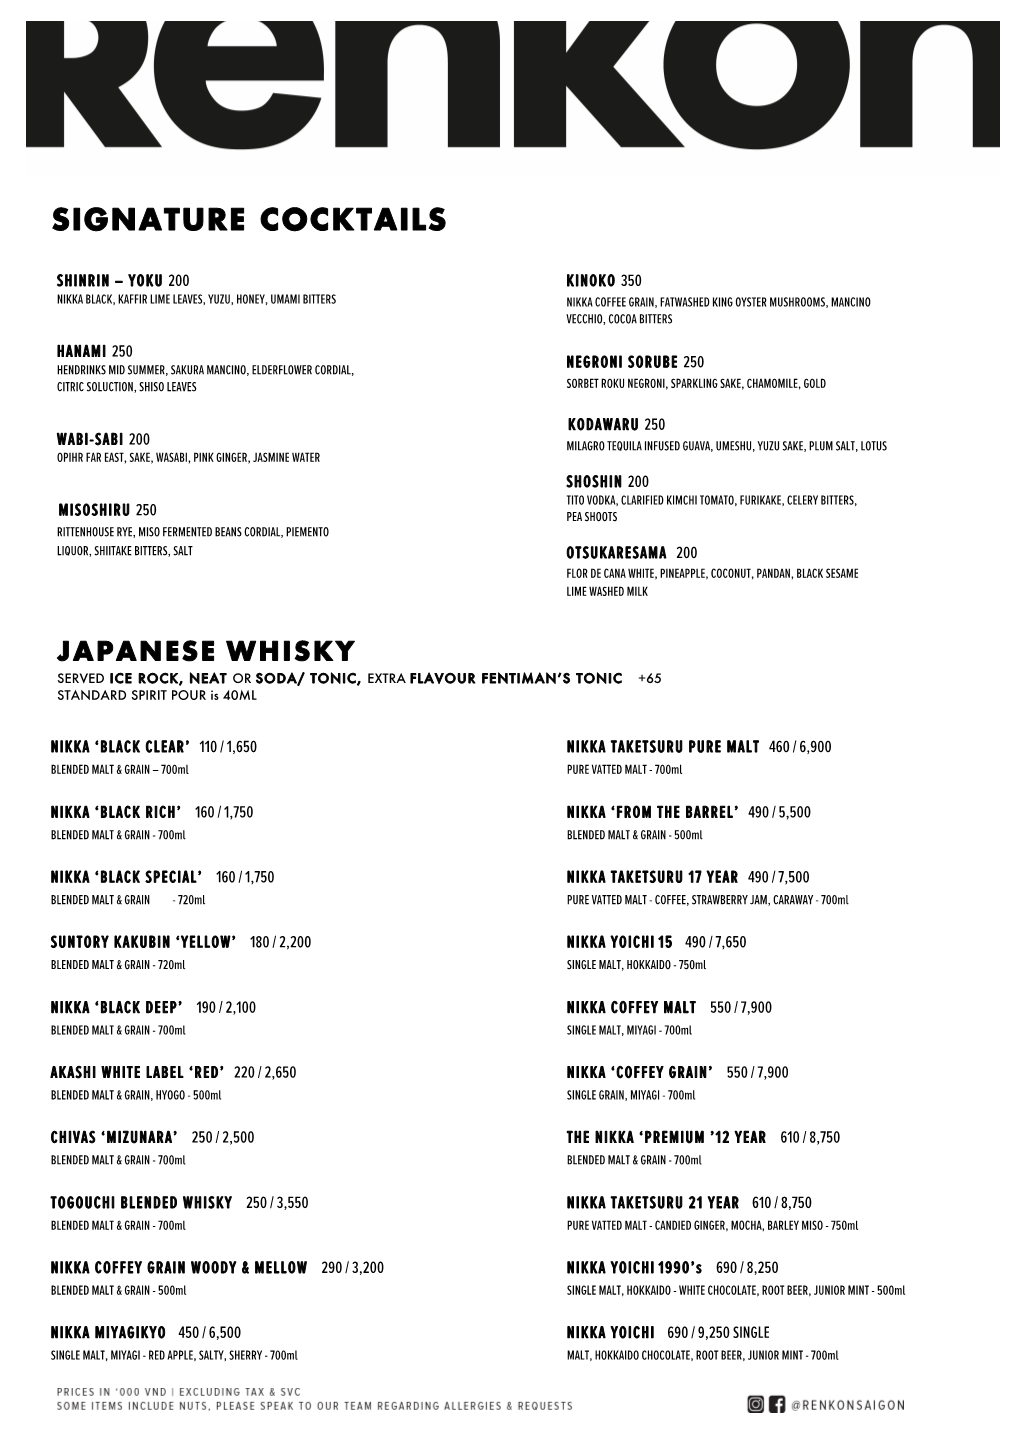 Signature Cocktails Japanese Whisky